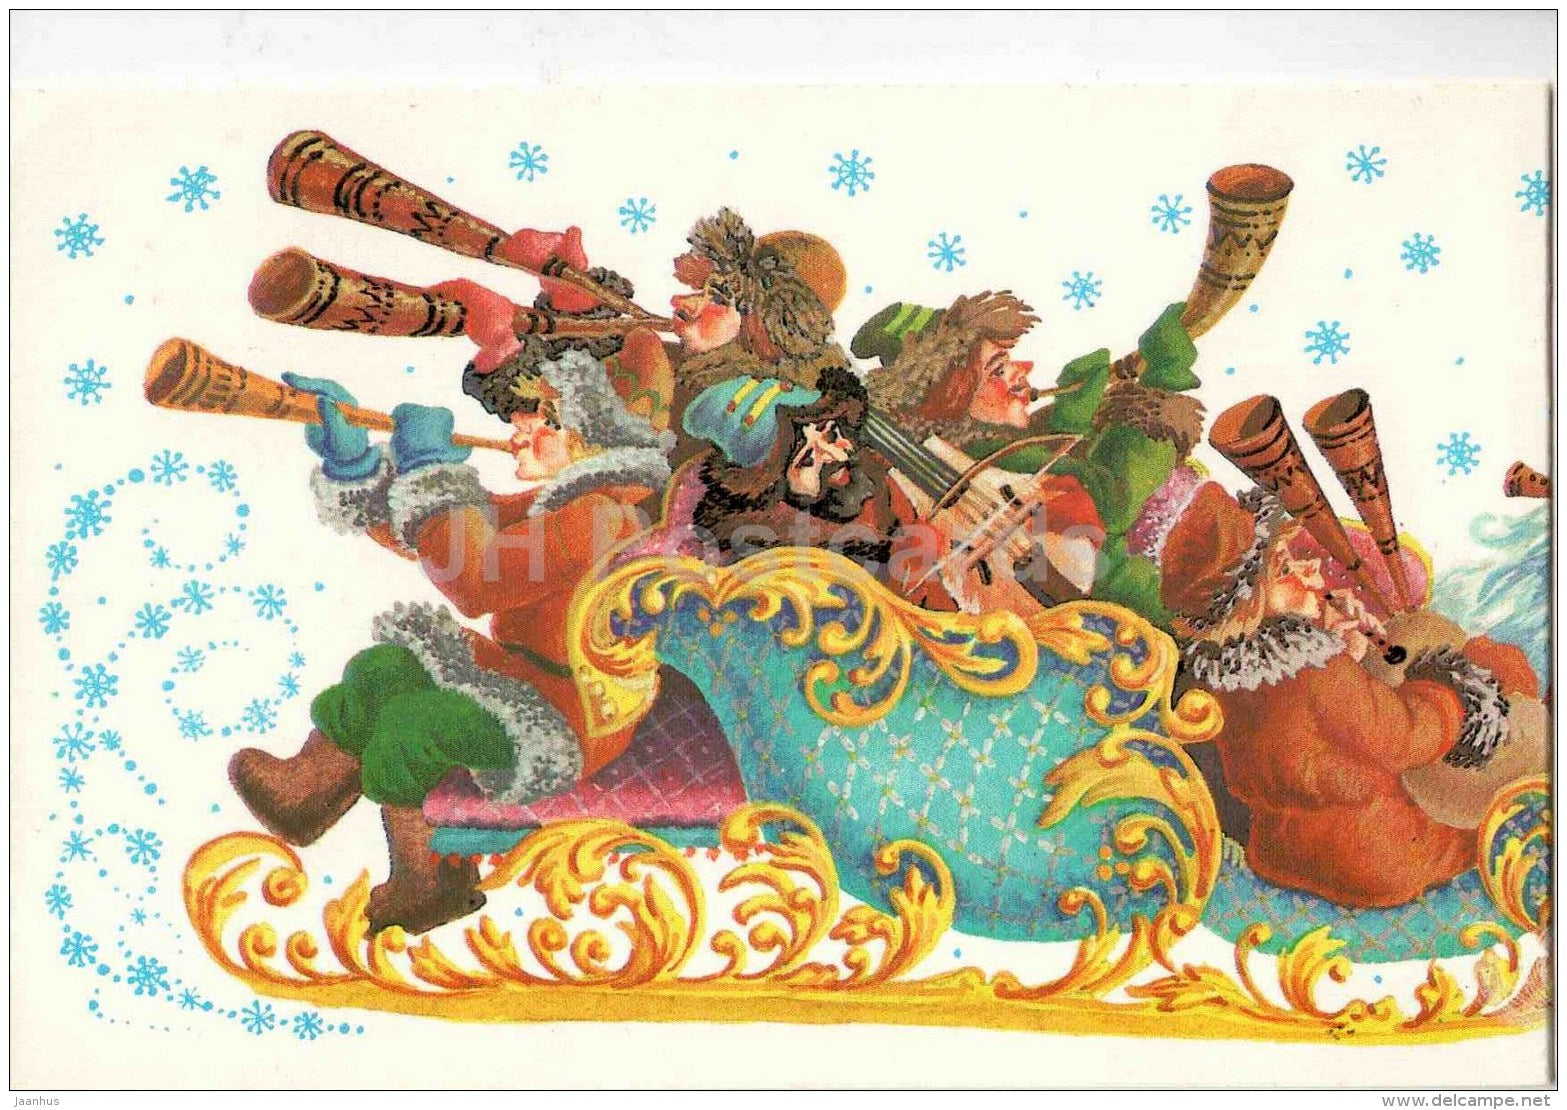 New Year greeting card by L. Pokhitonova - horse sledge - musicians - pipe - Ded Moroz - 1984 - Russia USSR - unused - JH Postcards